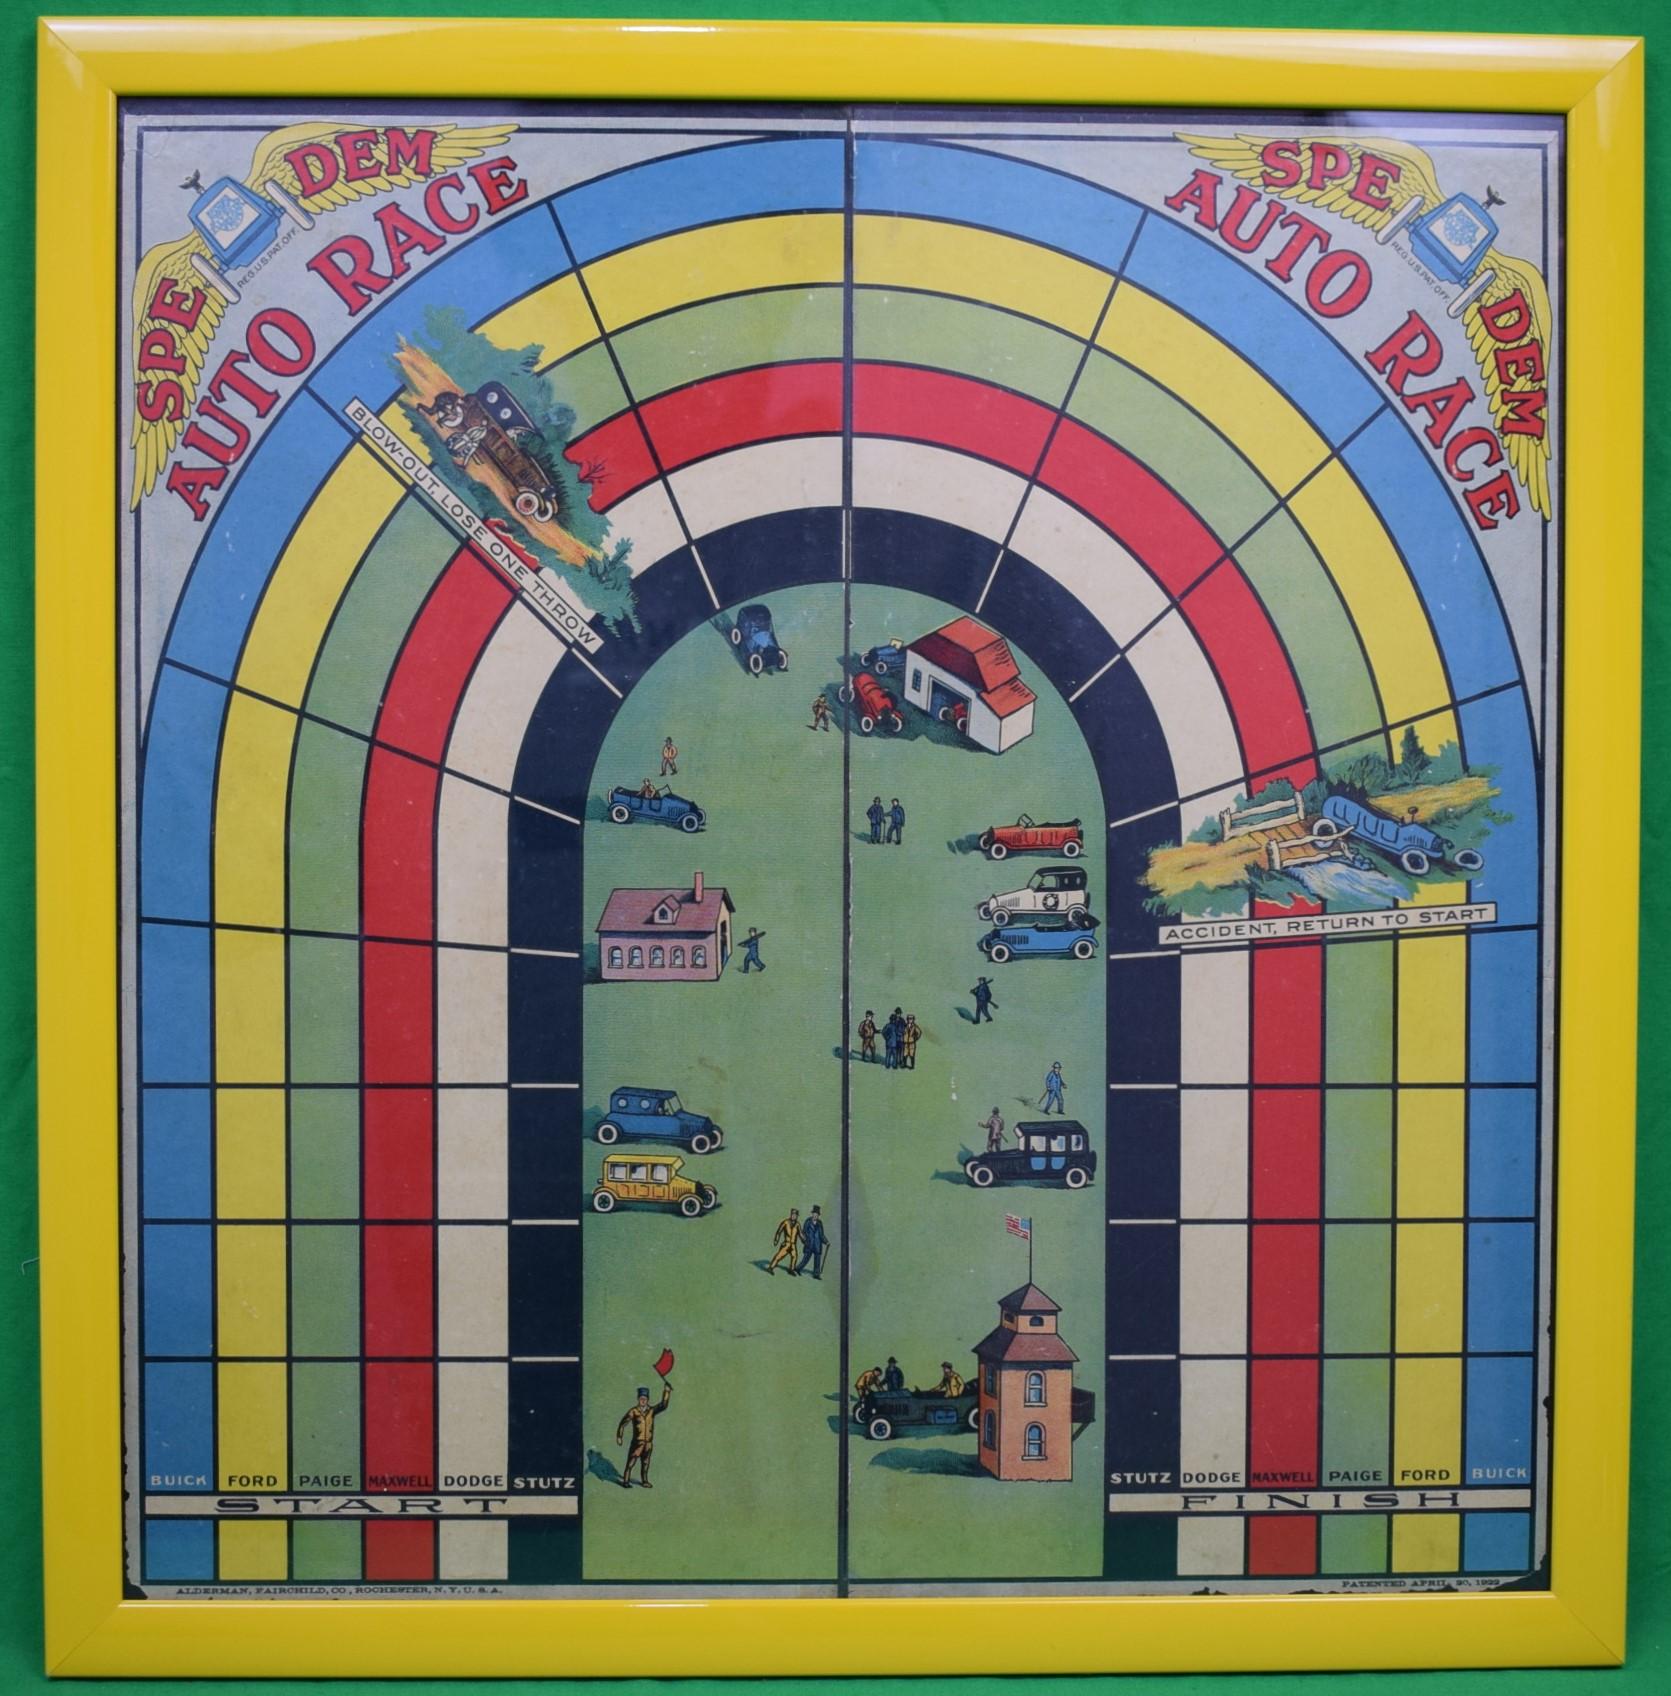 "Spe-Dem Auto Race c1922 Game Board" In Yellow Lacquer Frame - Art by Unknown